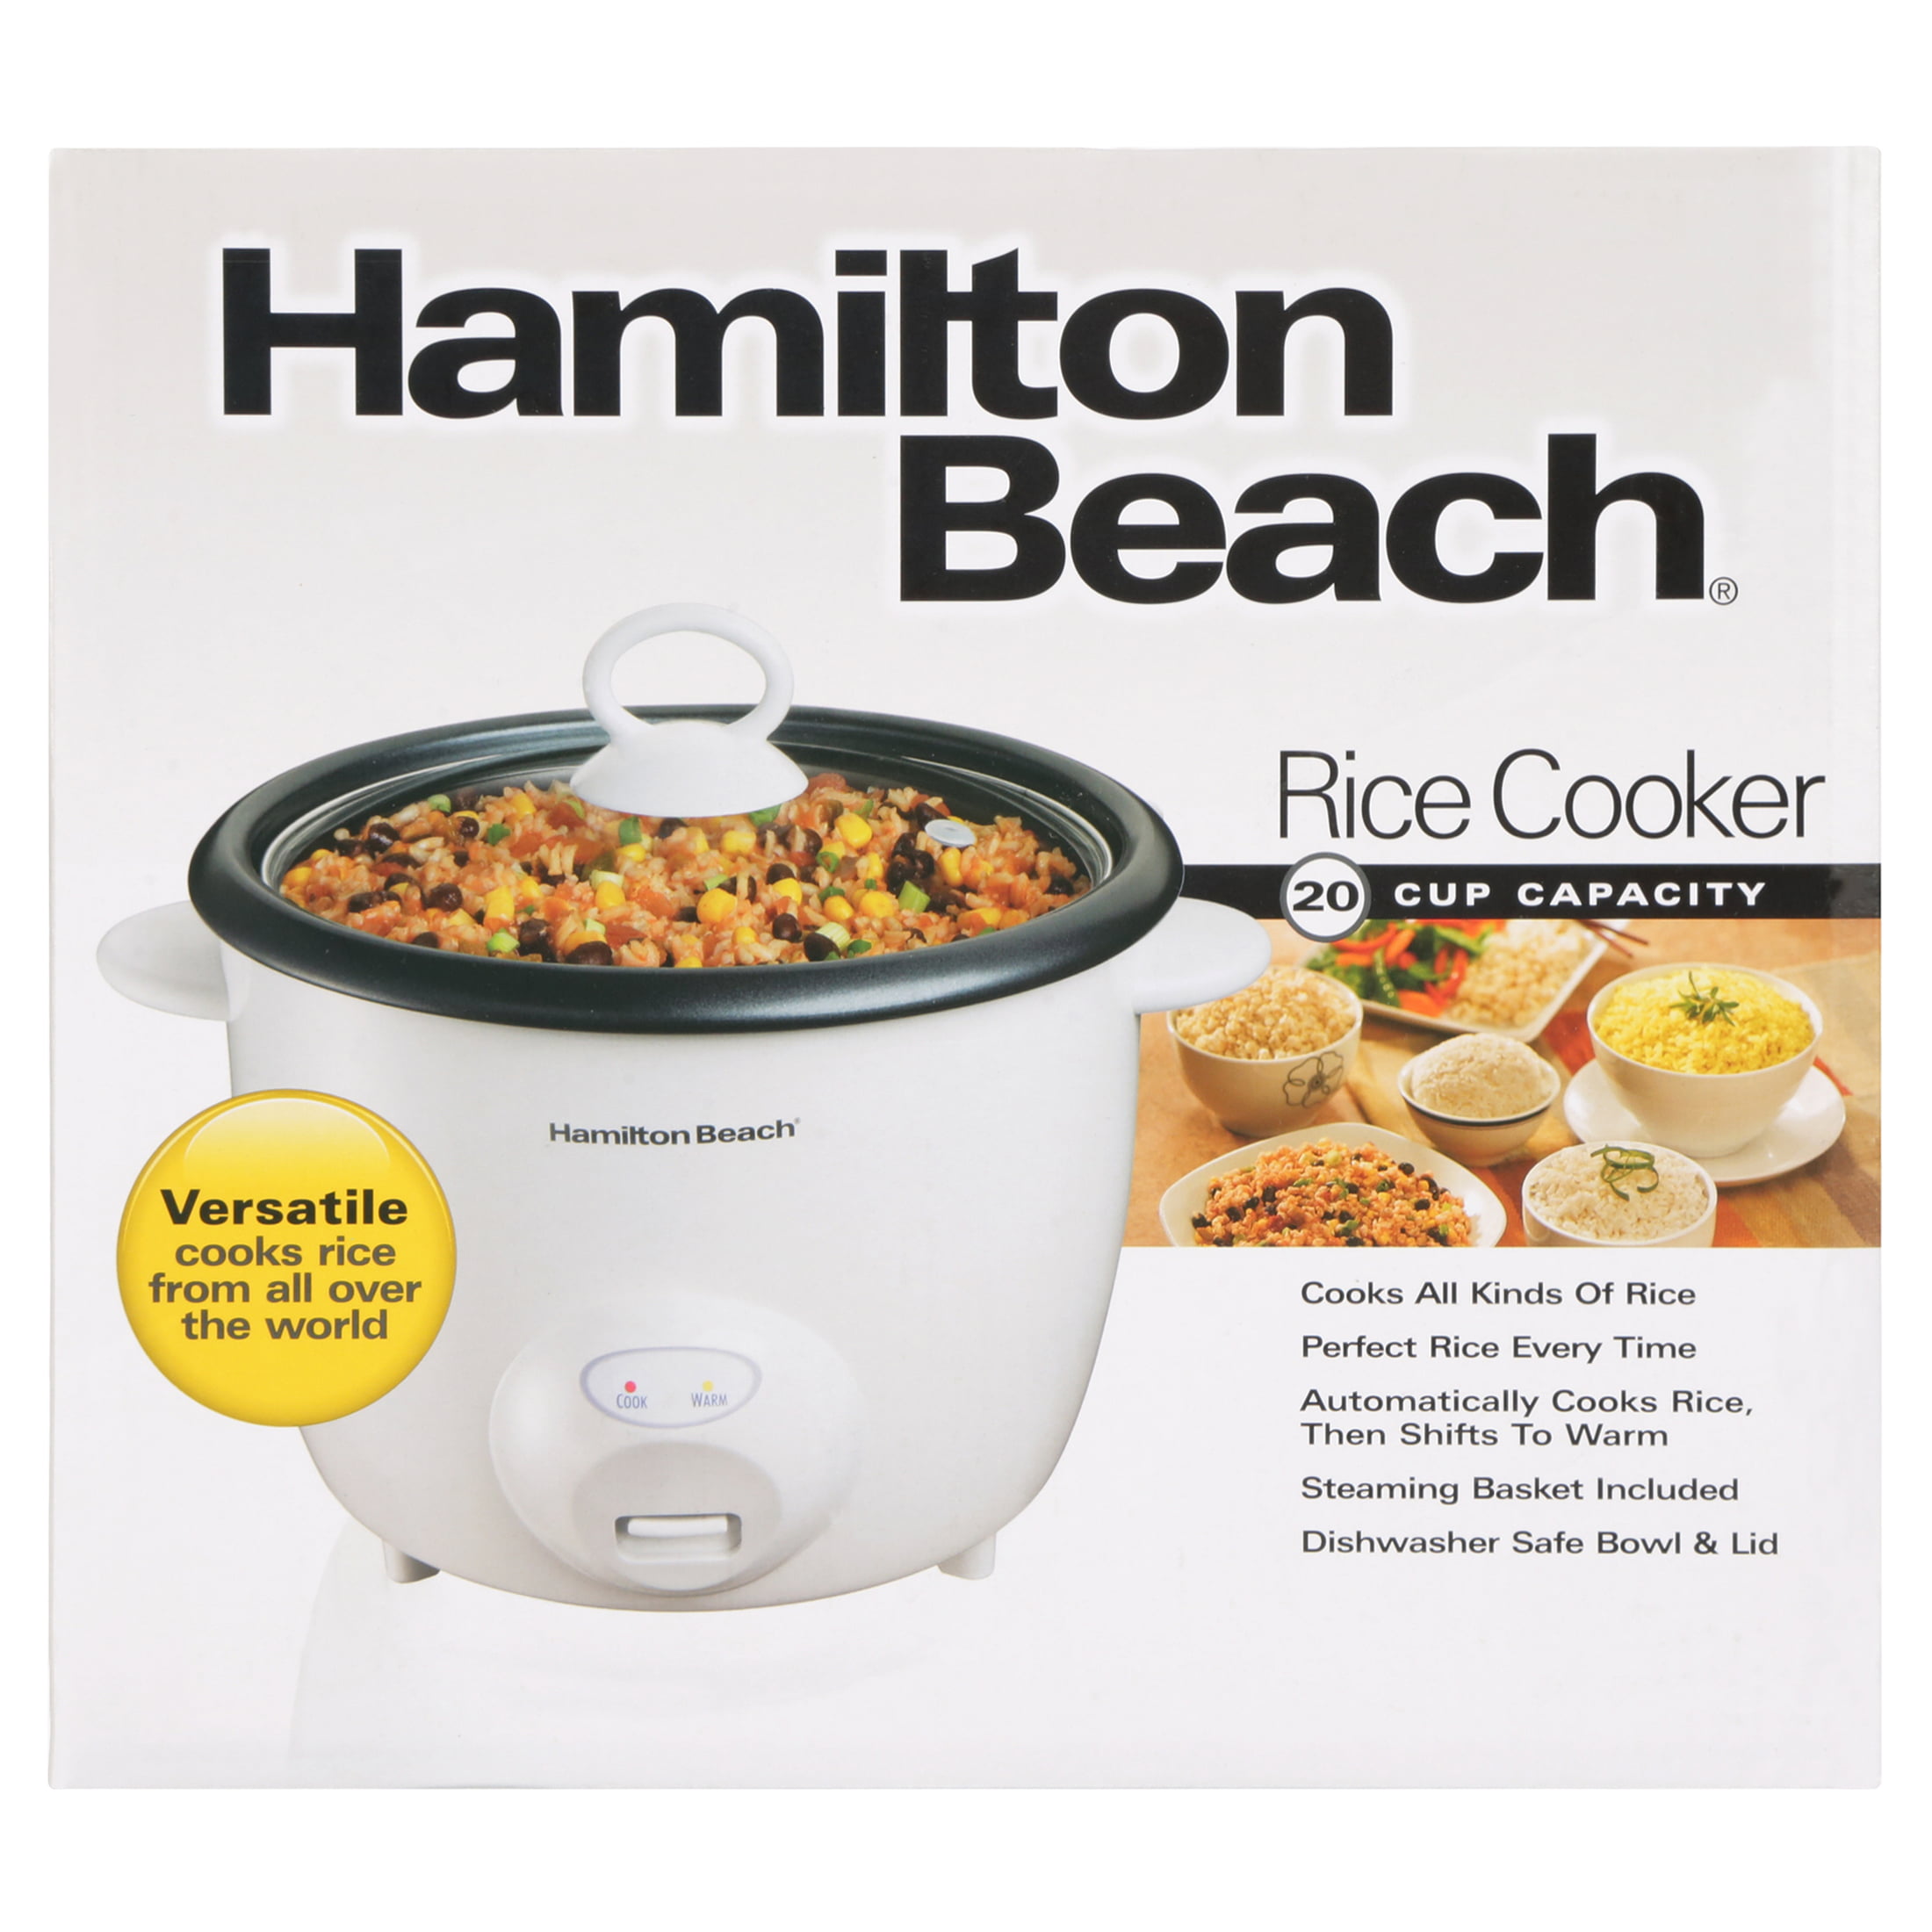 Hamilton Beach Ensemble 20 Cup Rice Cooker and Food Steamer Model# 37528 